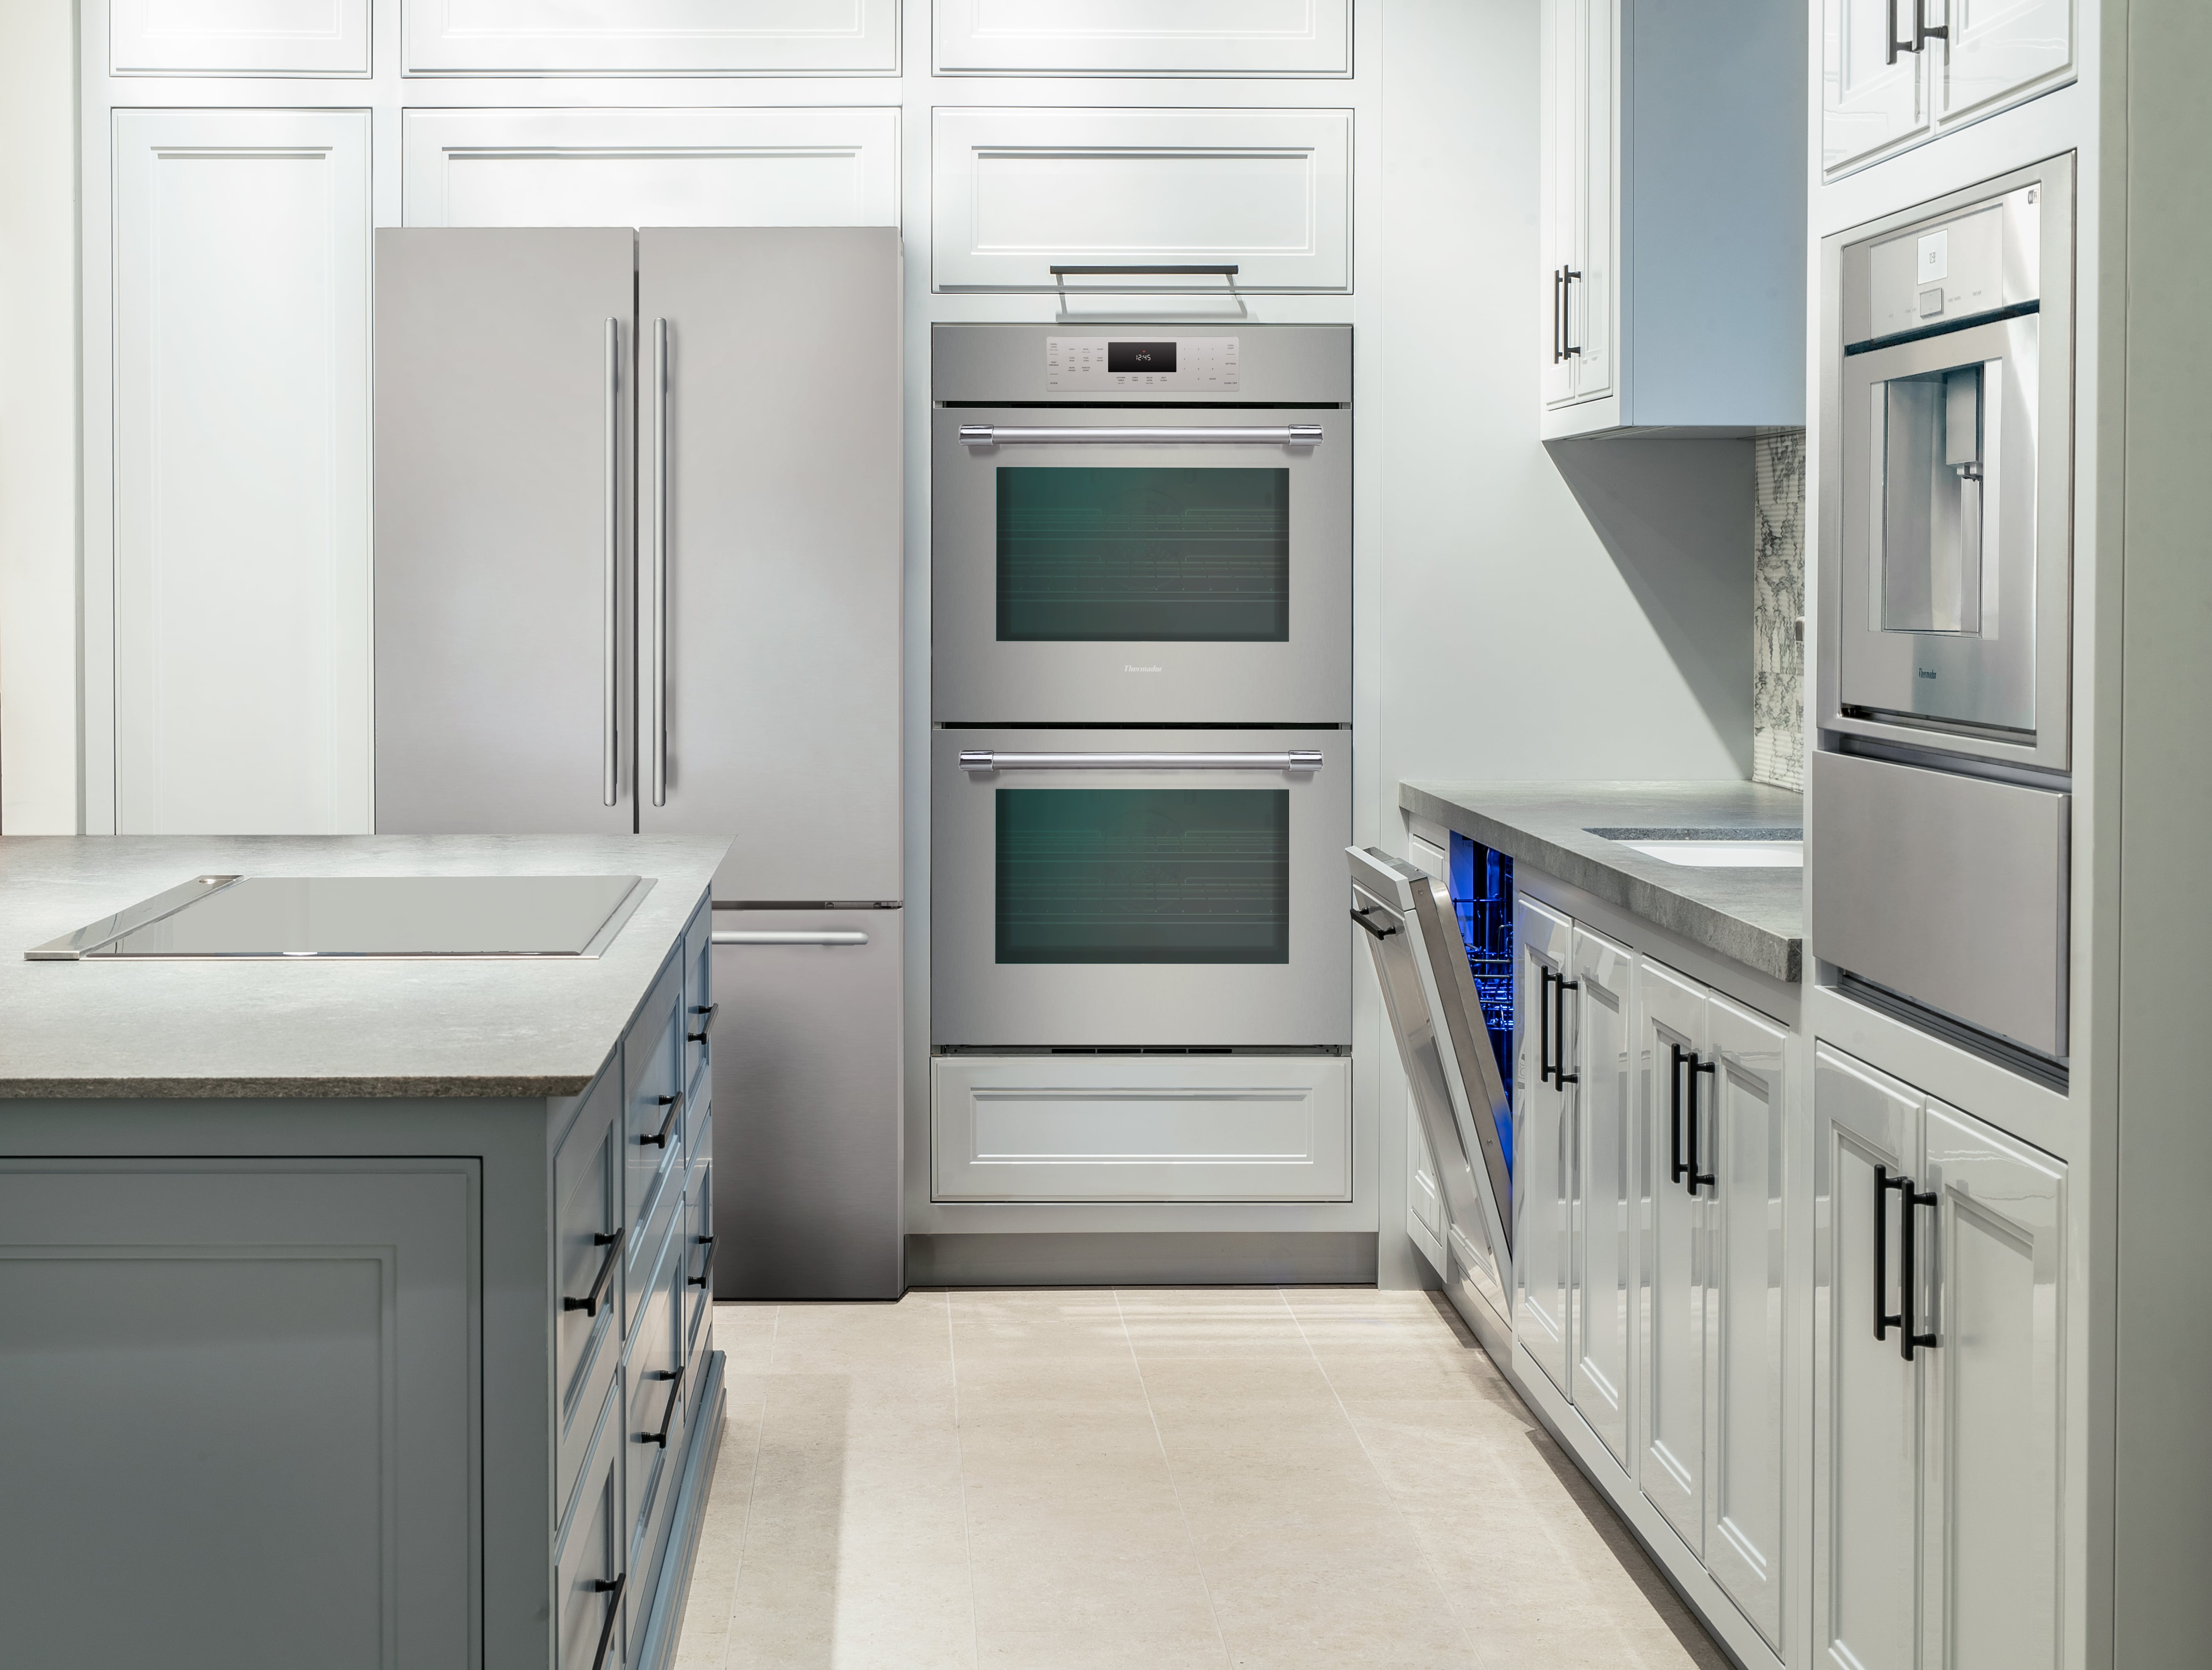 thermador introduces appliance packages offering cost benefits